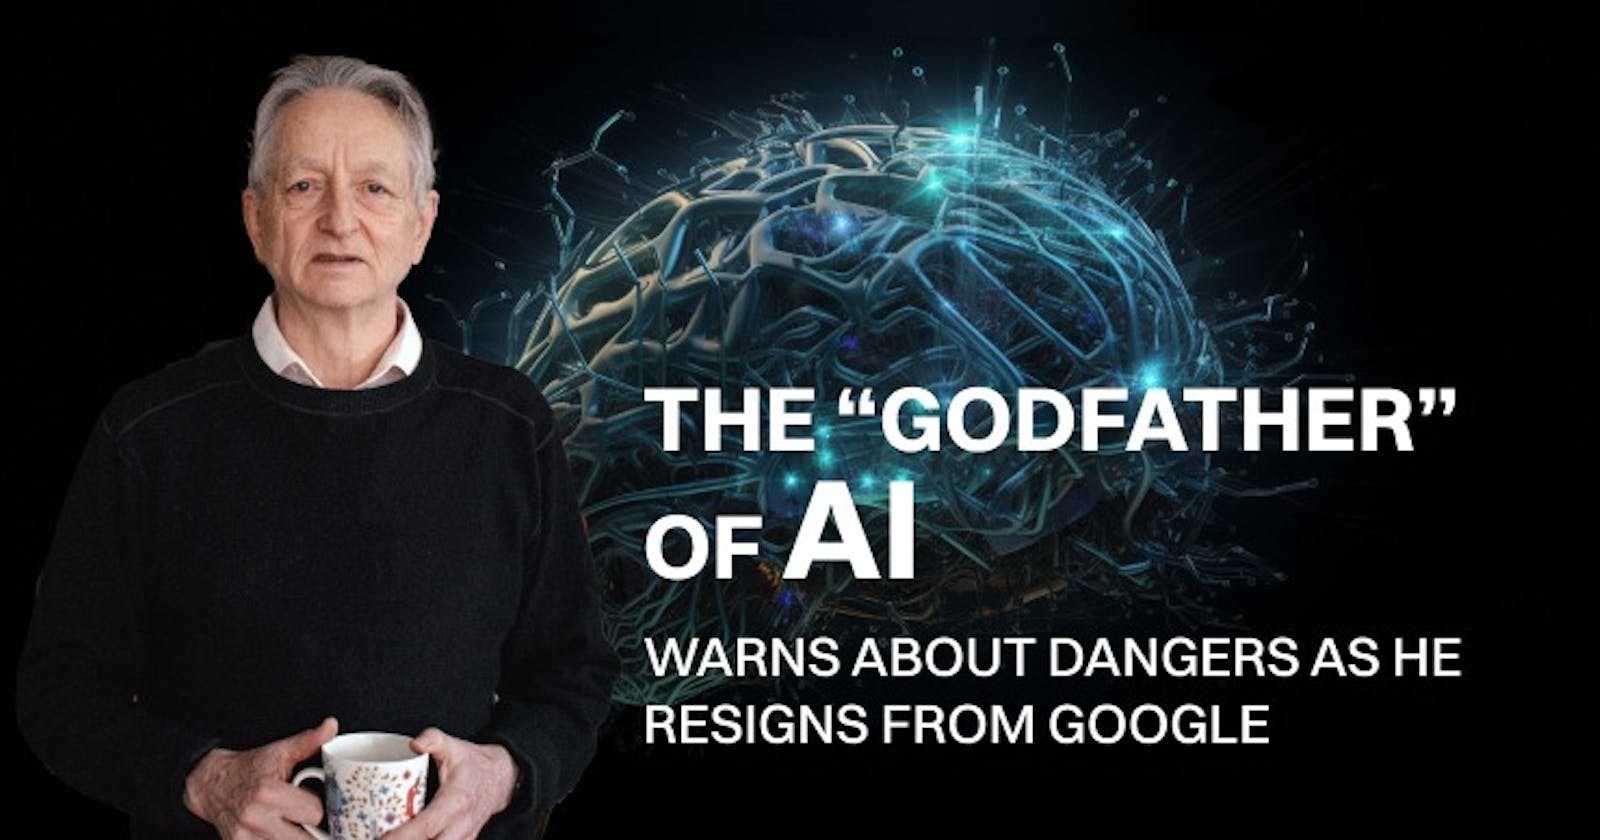 AI 'godfather' quits Google over dangers of Artificial Intelligence - BBC News